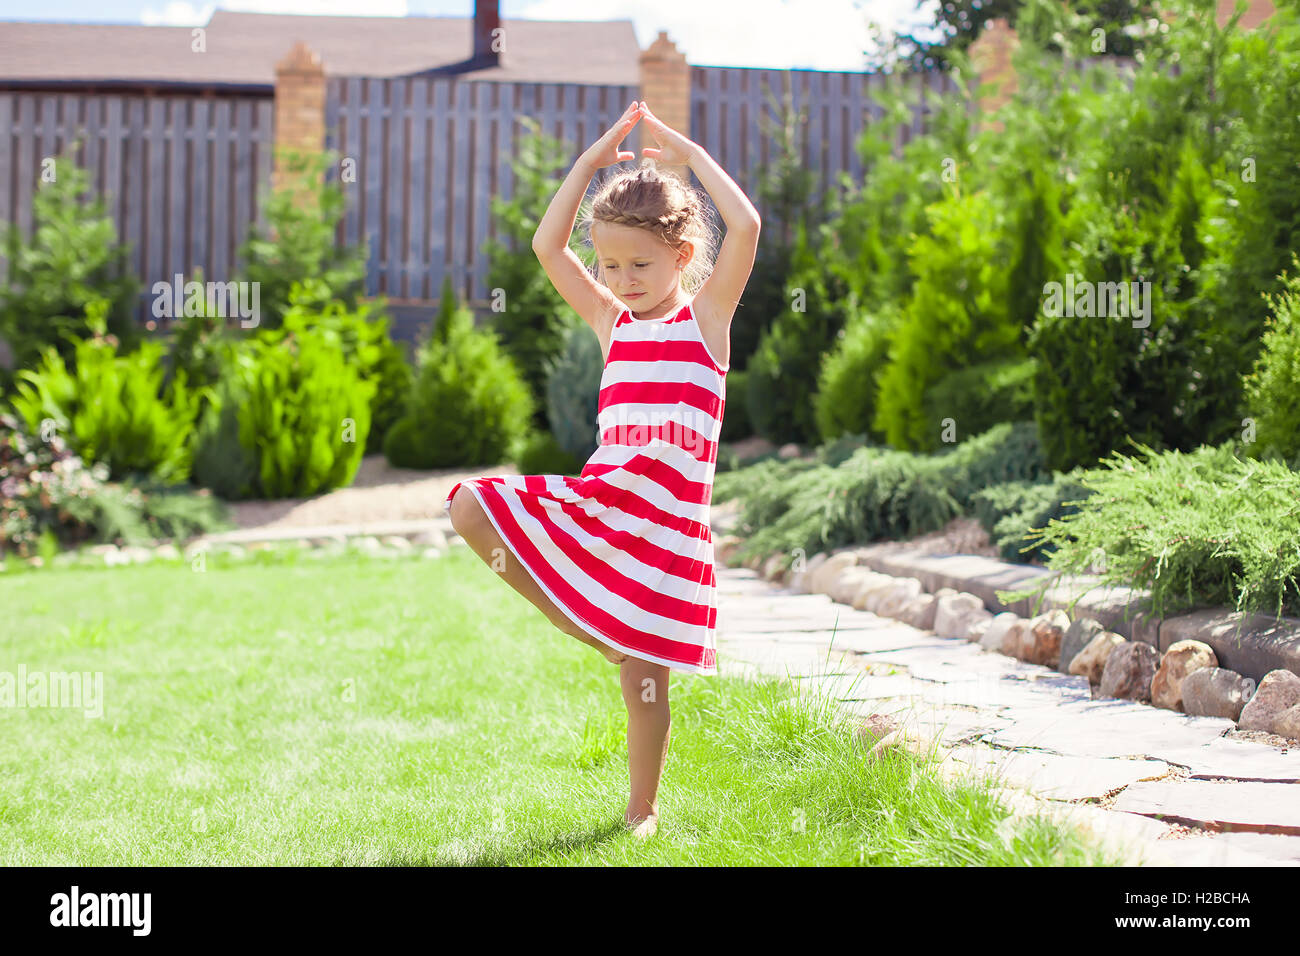 https://c8.alamy.com/comp/H2BCHA/little-adorable-girl-standing-in-a-yoga-pose-on-one-leg-H2BCHA.jpg